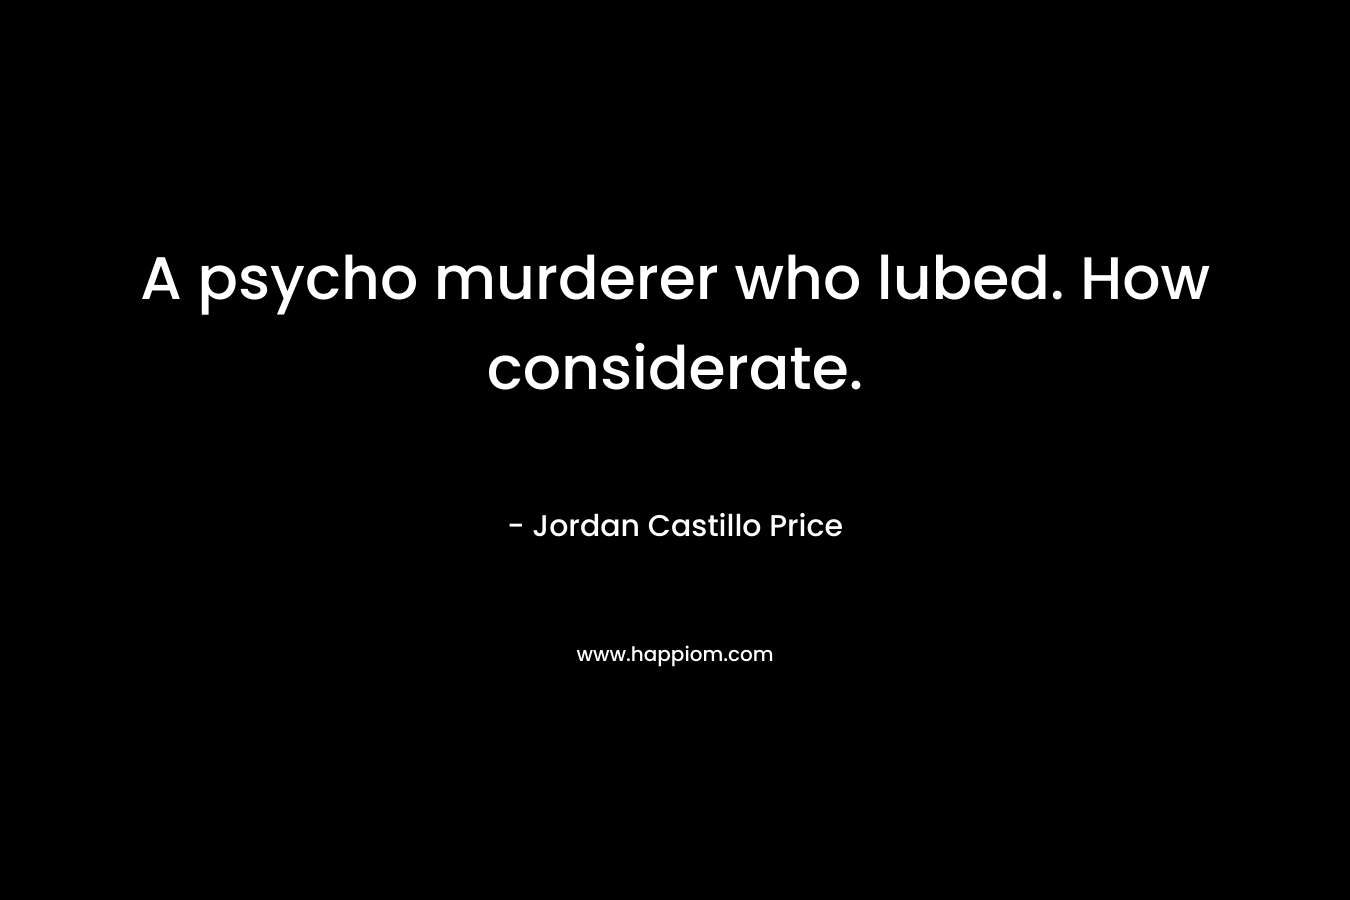 A psycho murderer who lubed. How considerate. – Jordan Castillo Price